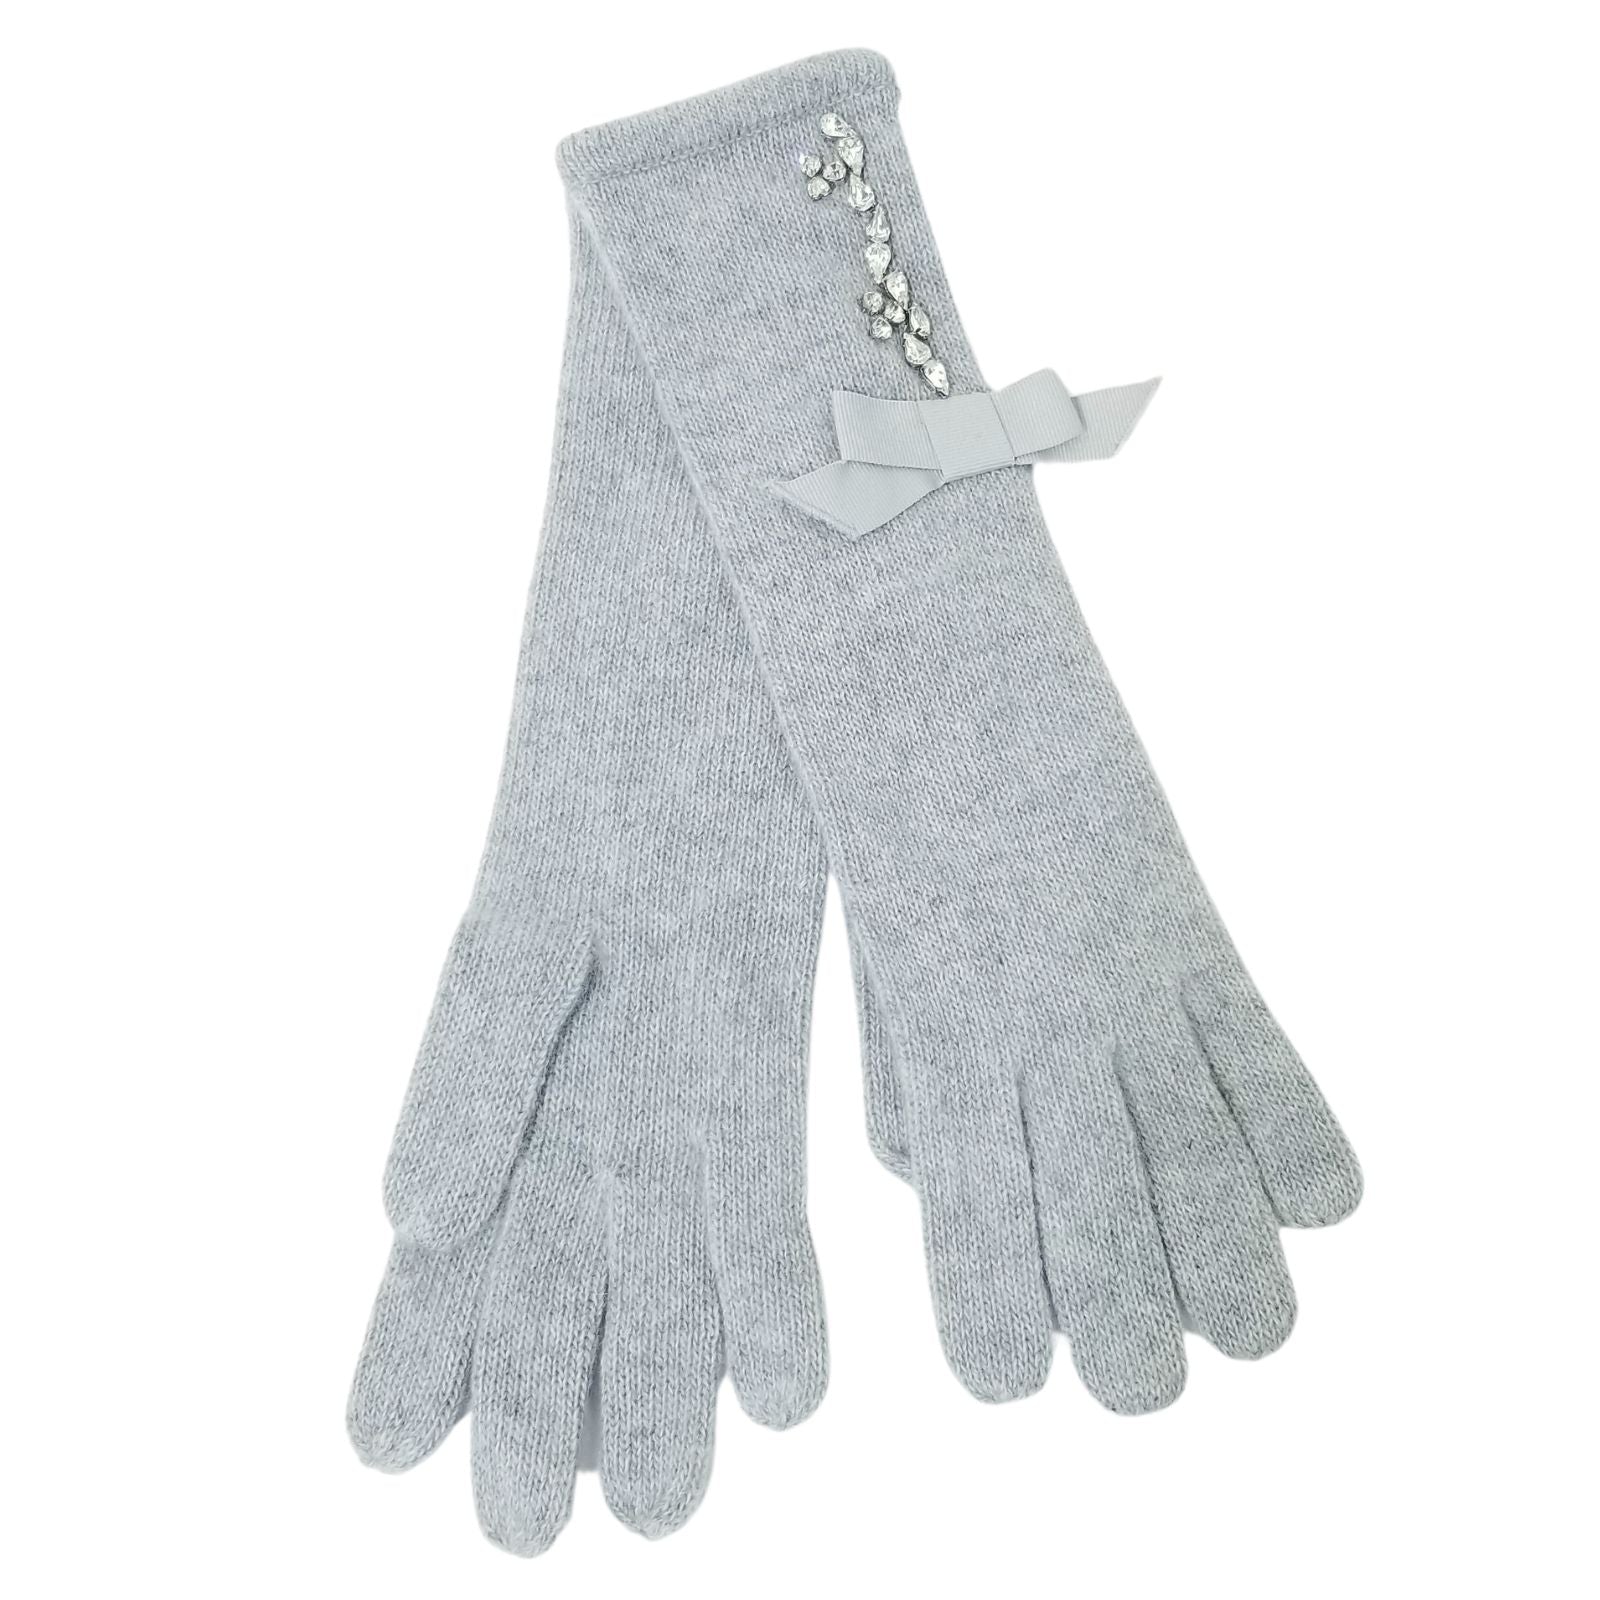 Cashmere glove 13 " with Crystal and Grosgrain Bow ,  Lt Heather Grey